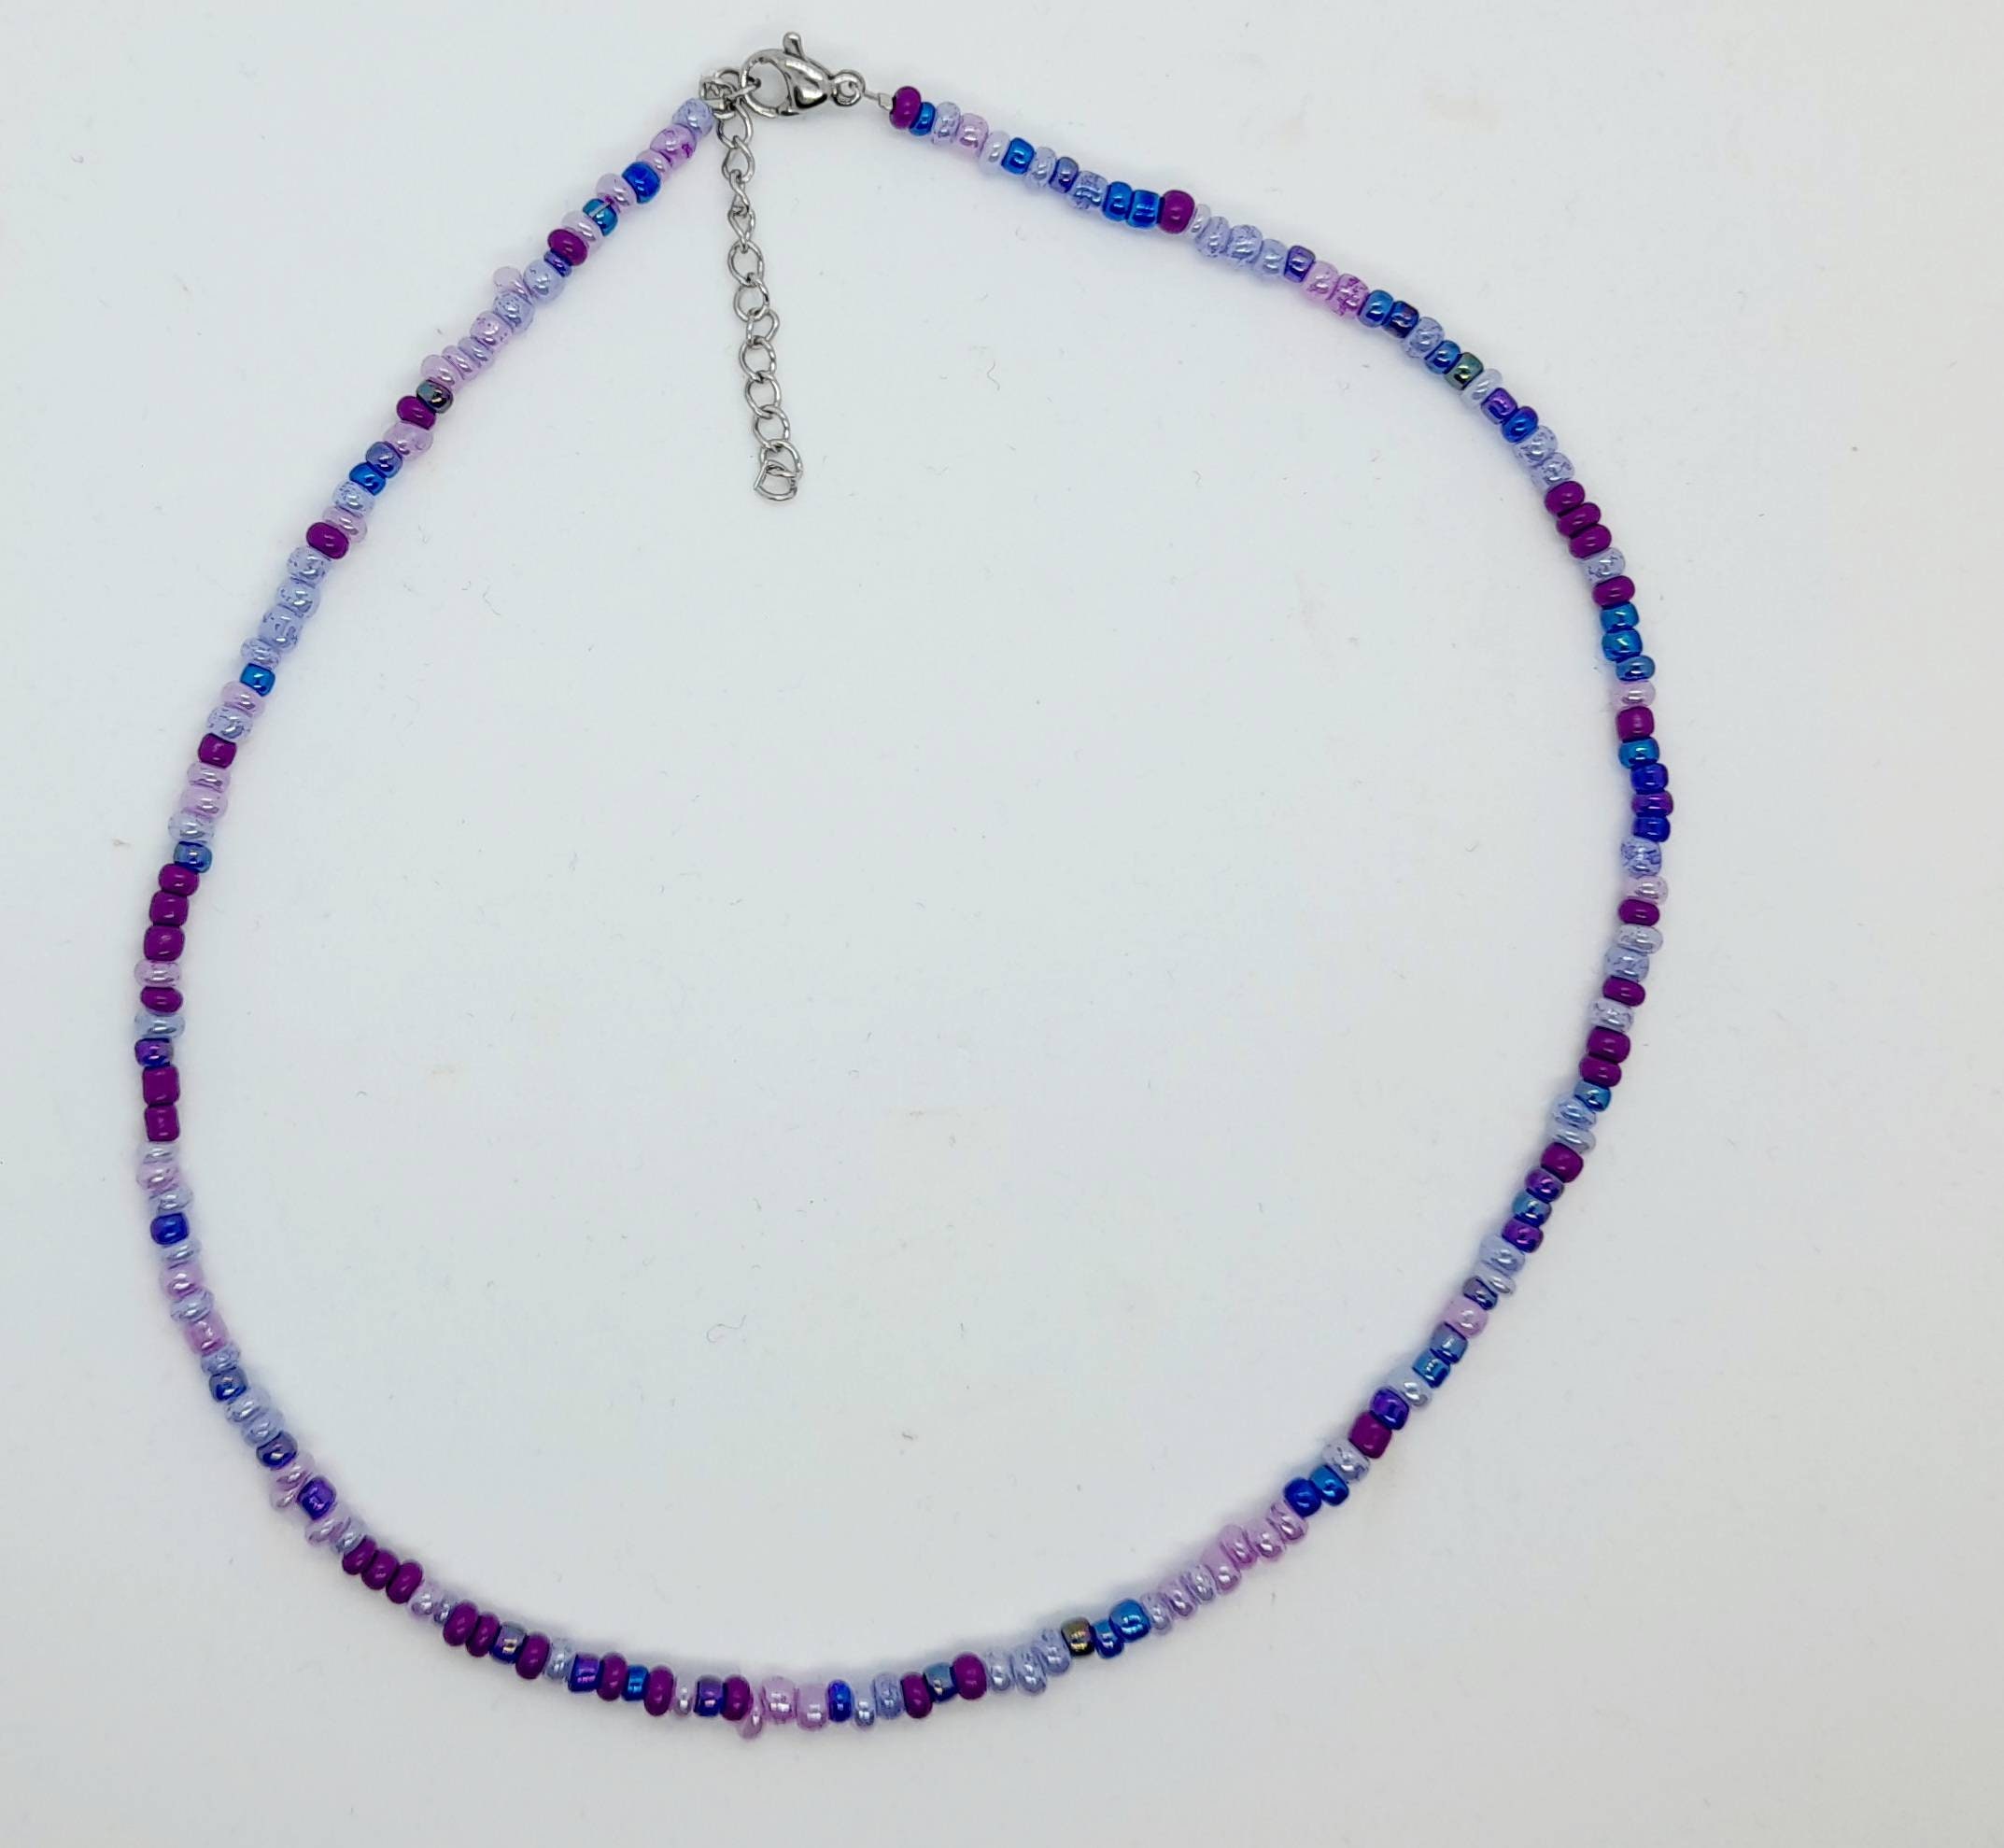 Glass Purple Beads Gravel Cute Beads Spacer Beads Necklace